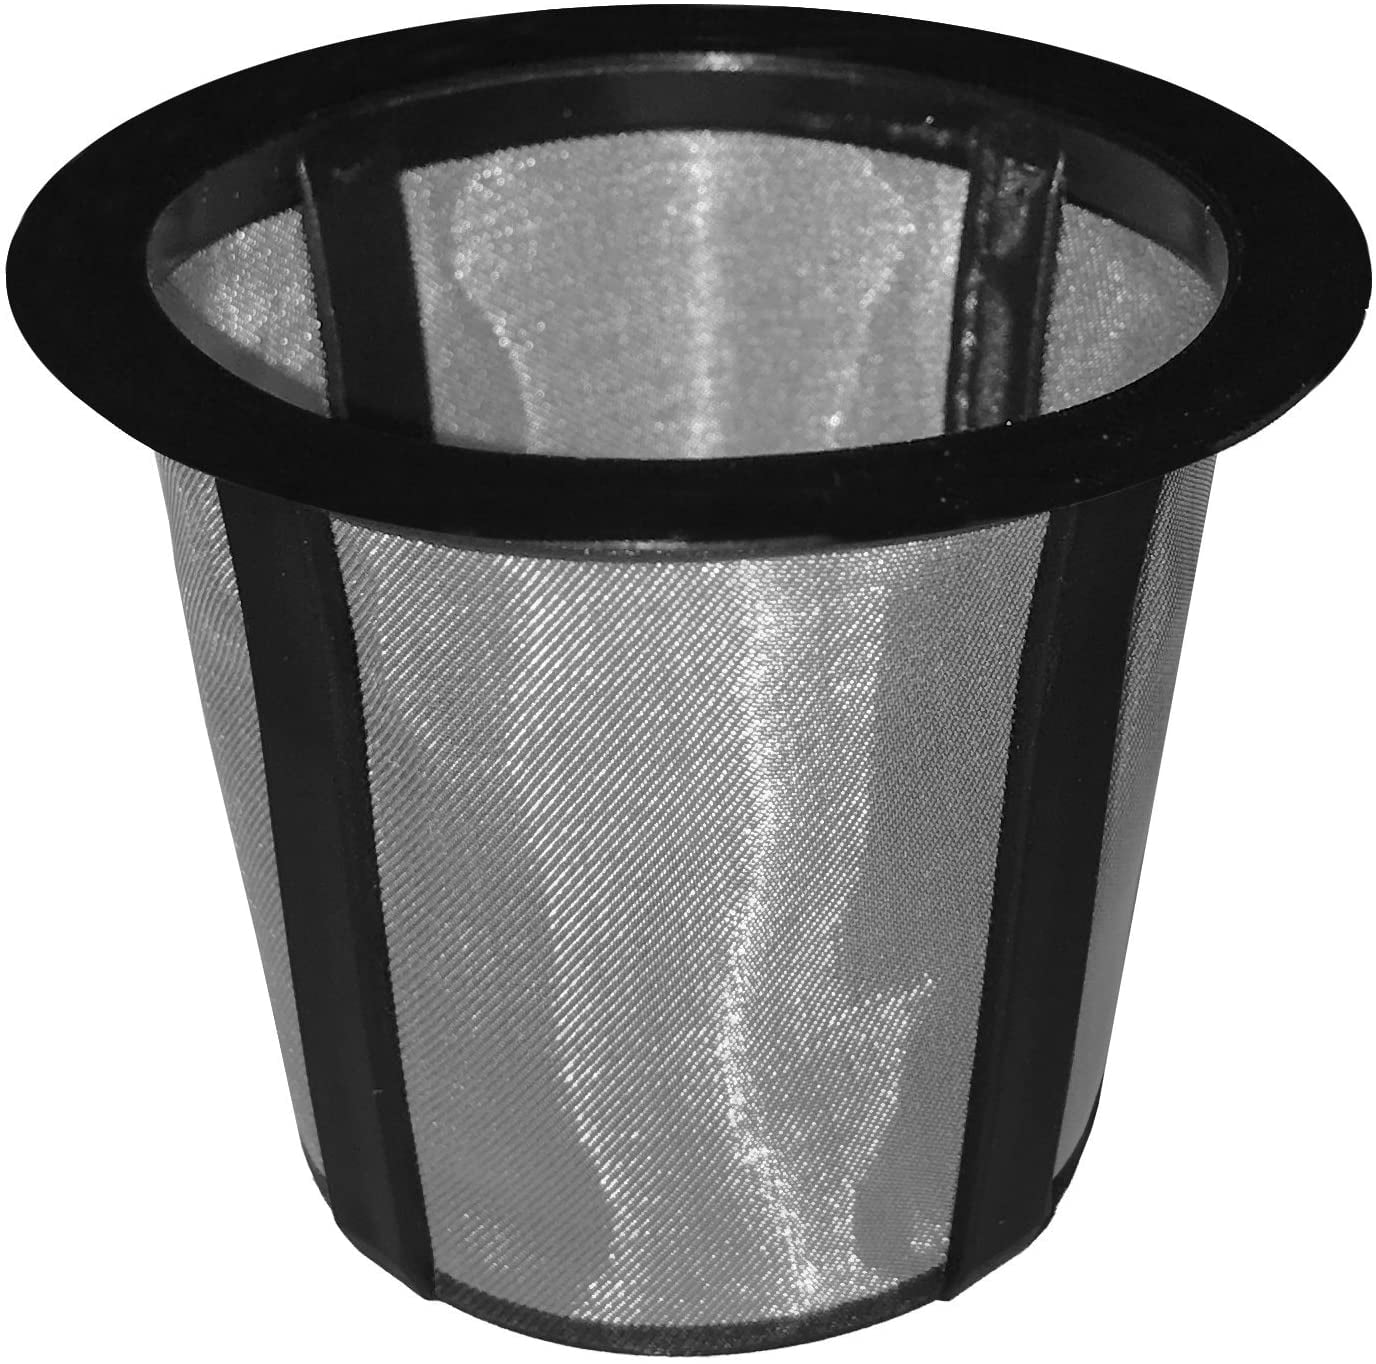 Filter cup